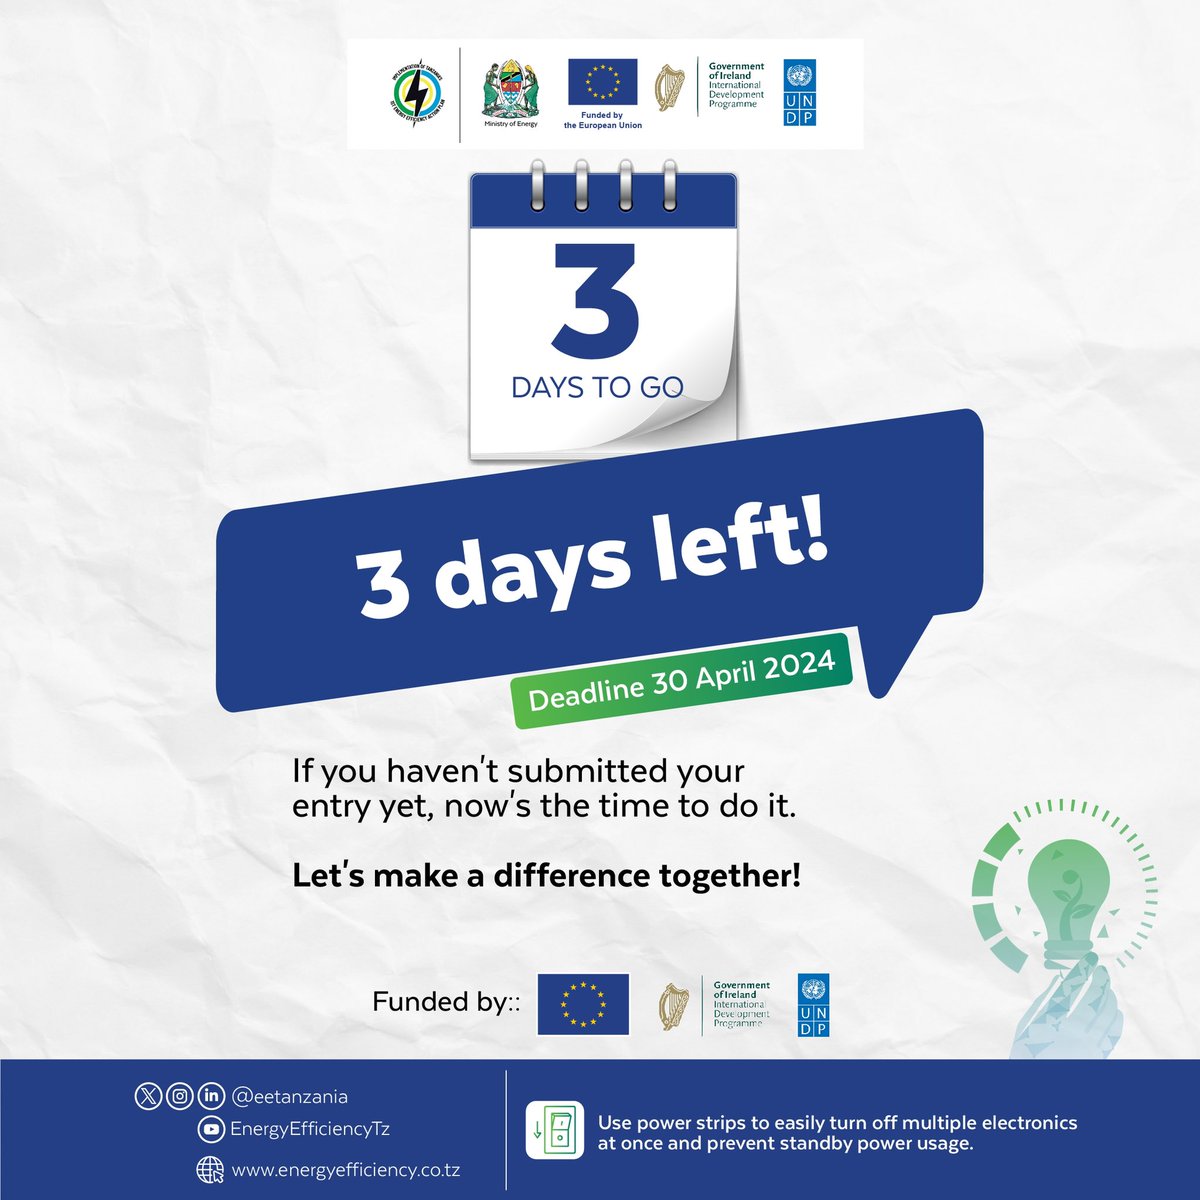 ⏰ Only 3 days left to enter the #EnergyEfficiency Innovation Challenge! Submit your innovations at energyefficiency.co.tz by April 30th for a chance to win up to 25,000,000 TZS in seed capital. #InnovationChallenge #SustainableFuture @EUinTZ @nishati2017 @IrlEmbTanzania